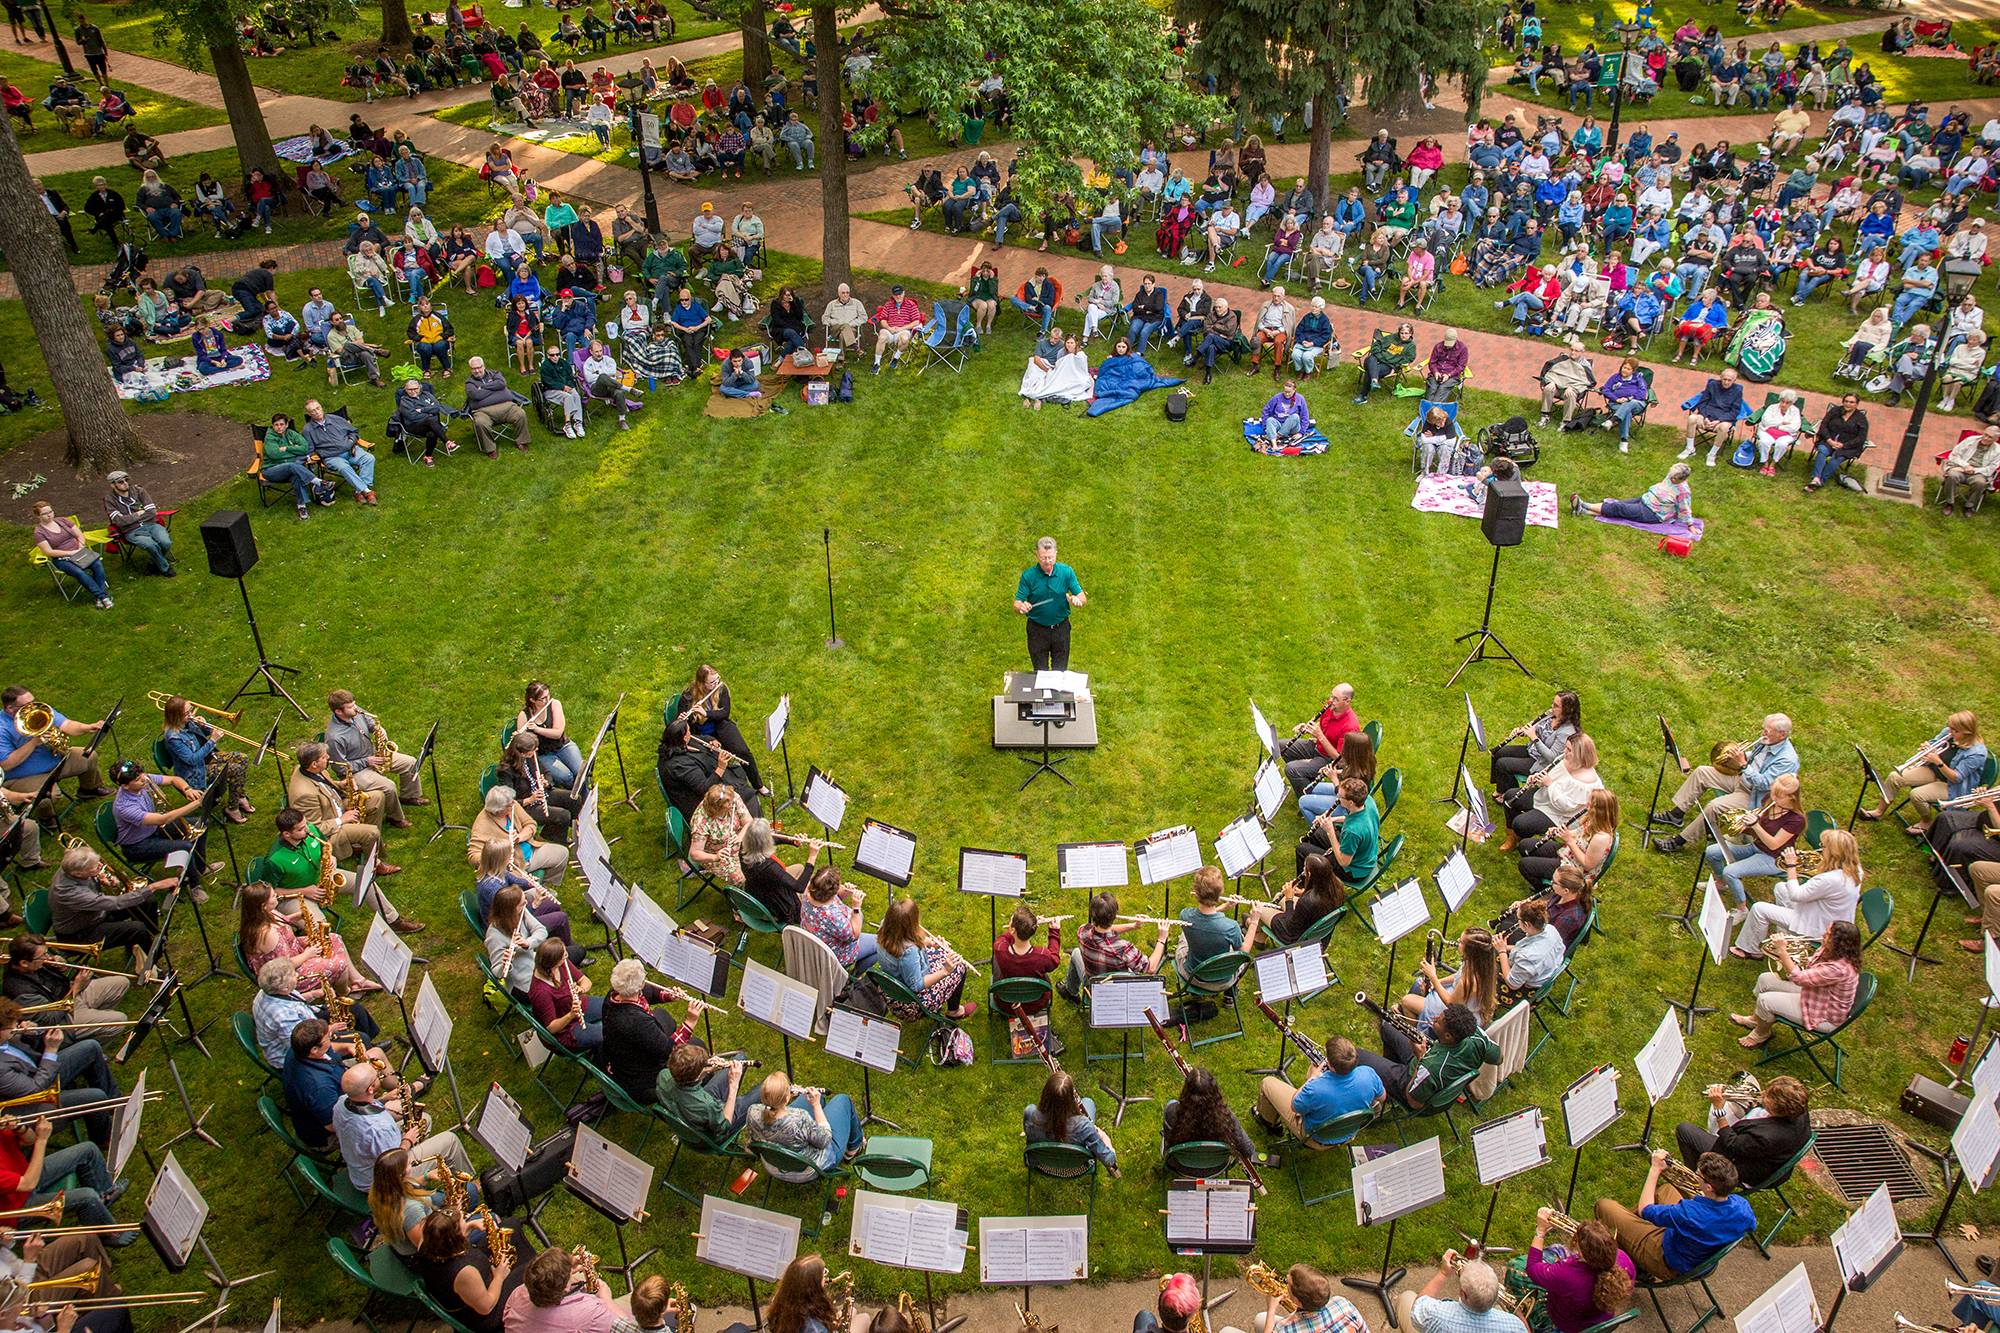 Members of the community band give free concerts every week at College Green during the summer.